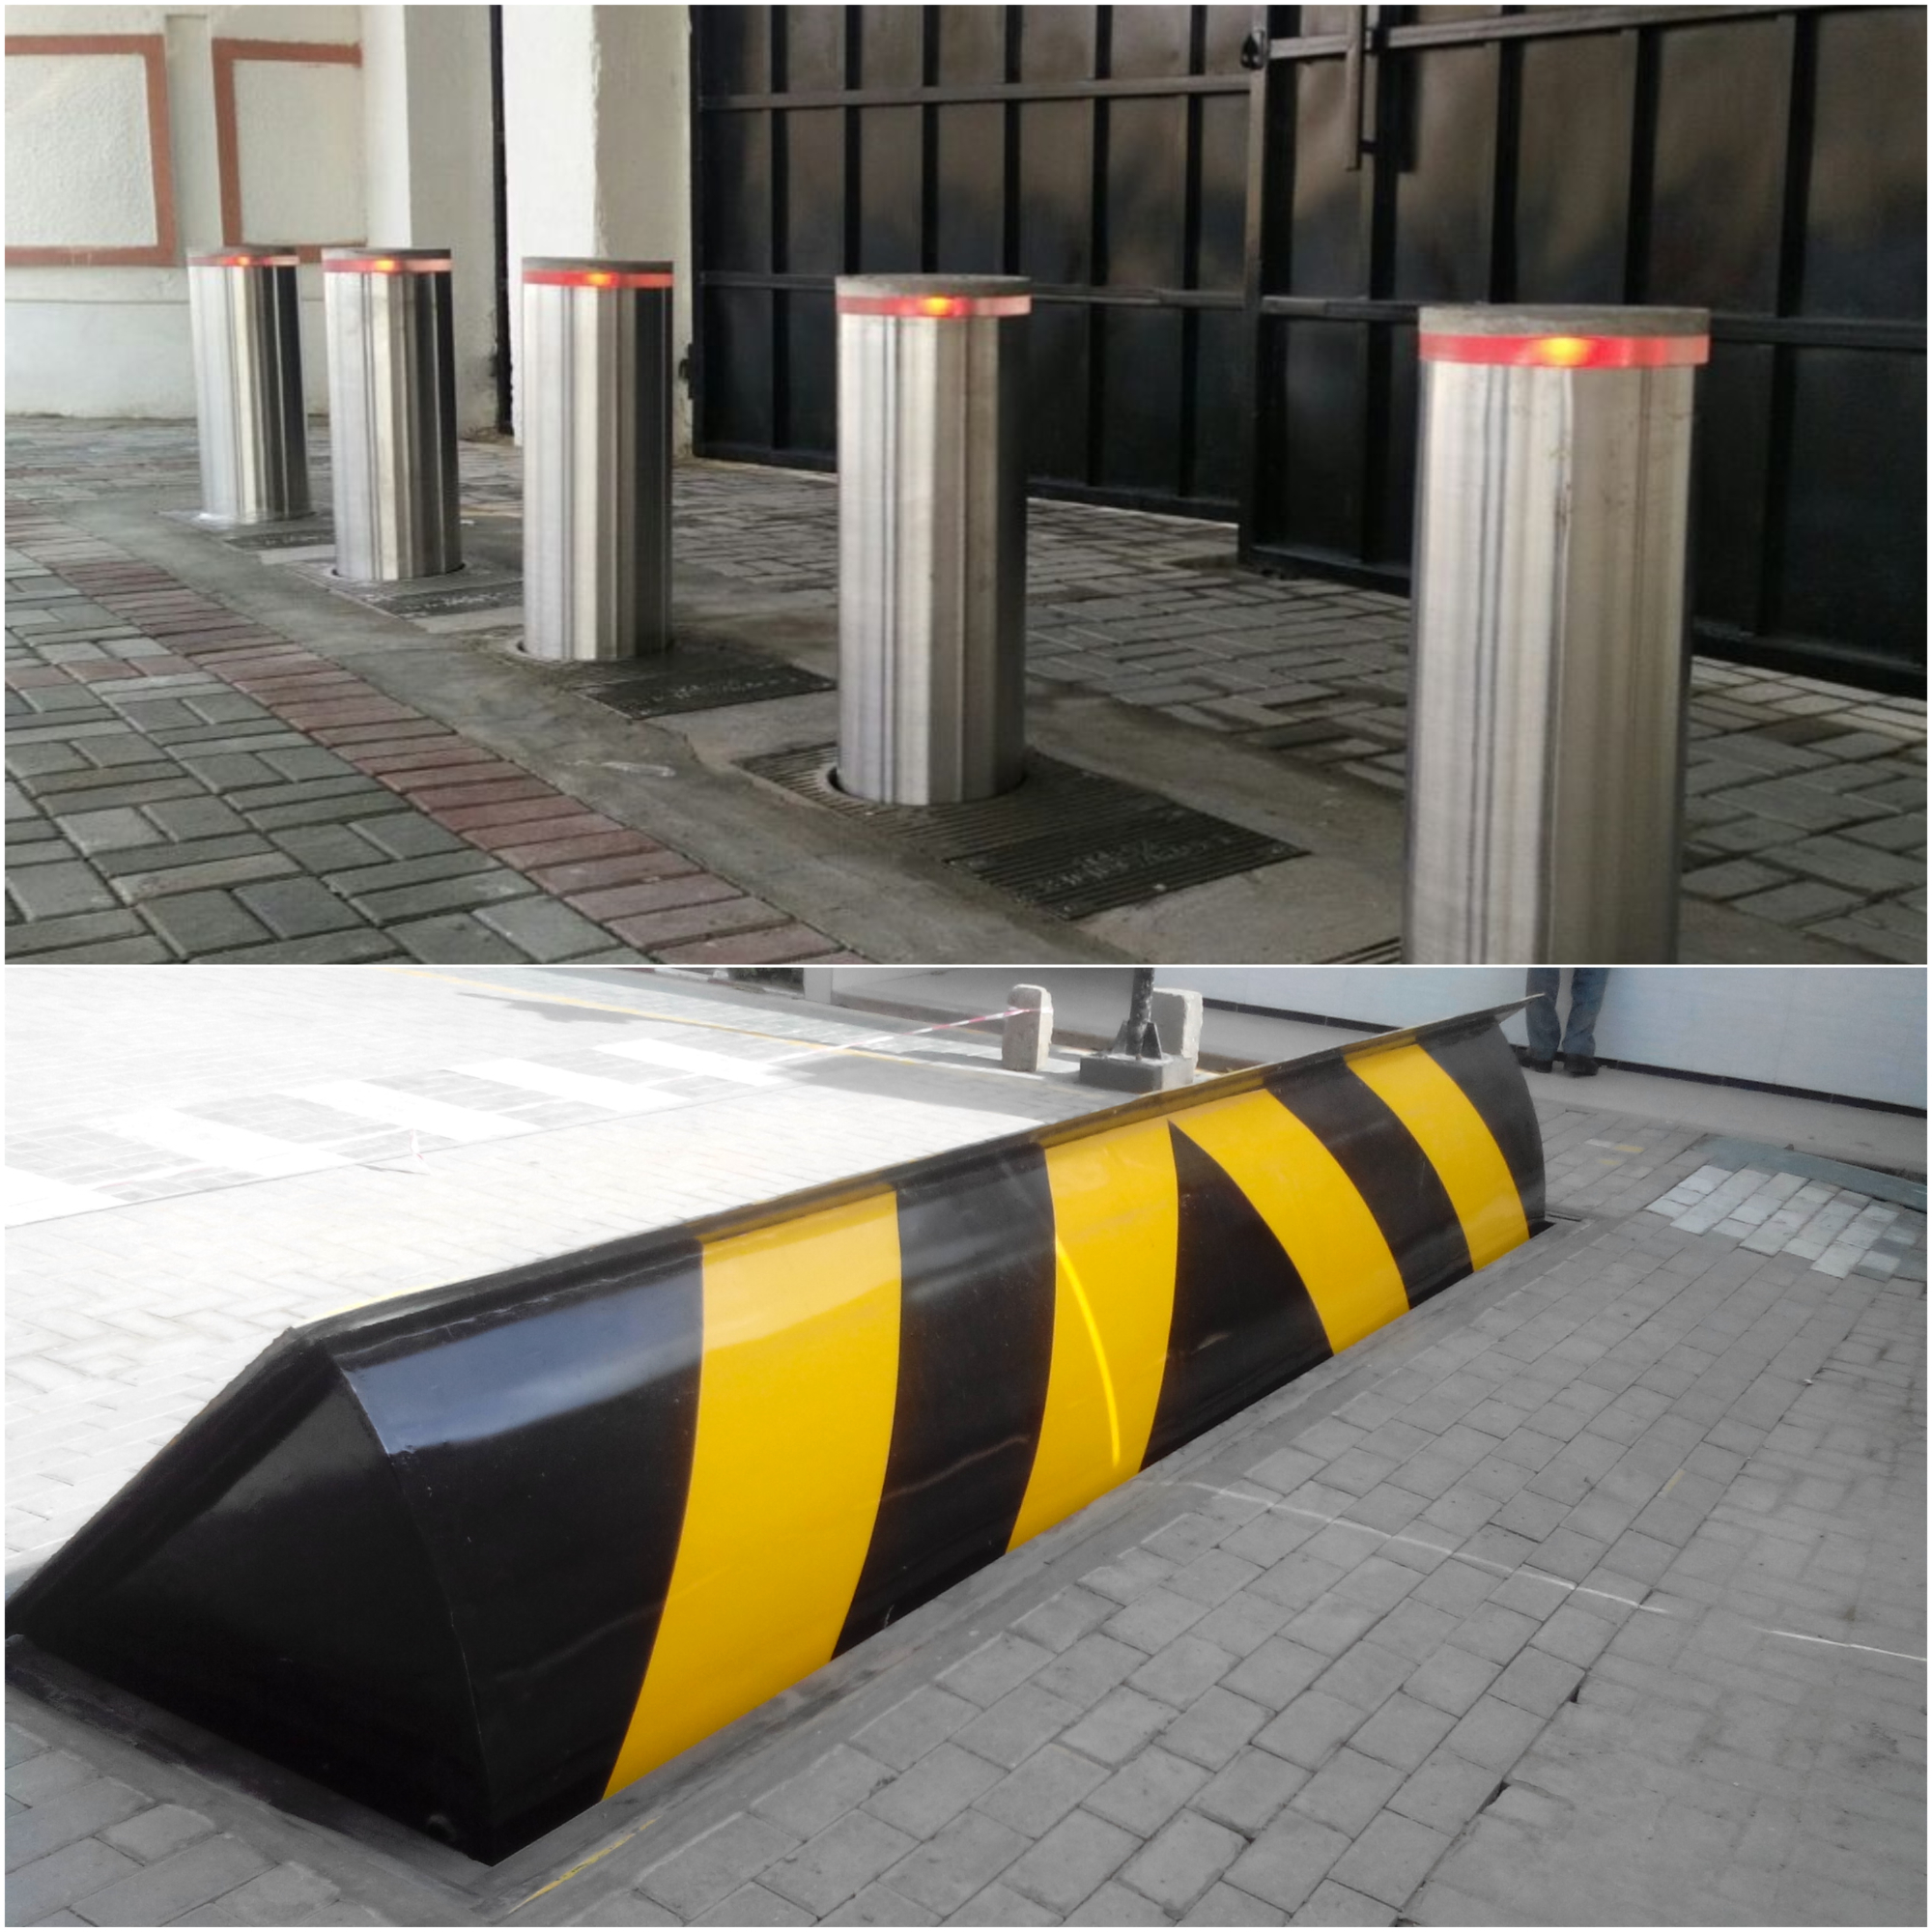 a road blocker and bollards picture in one frame